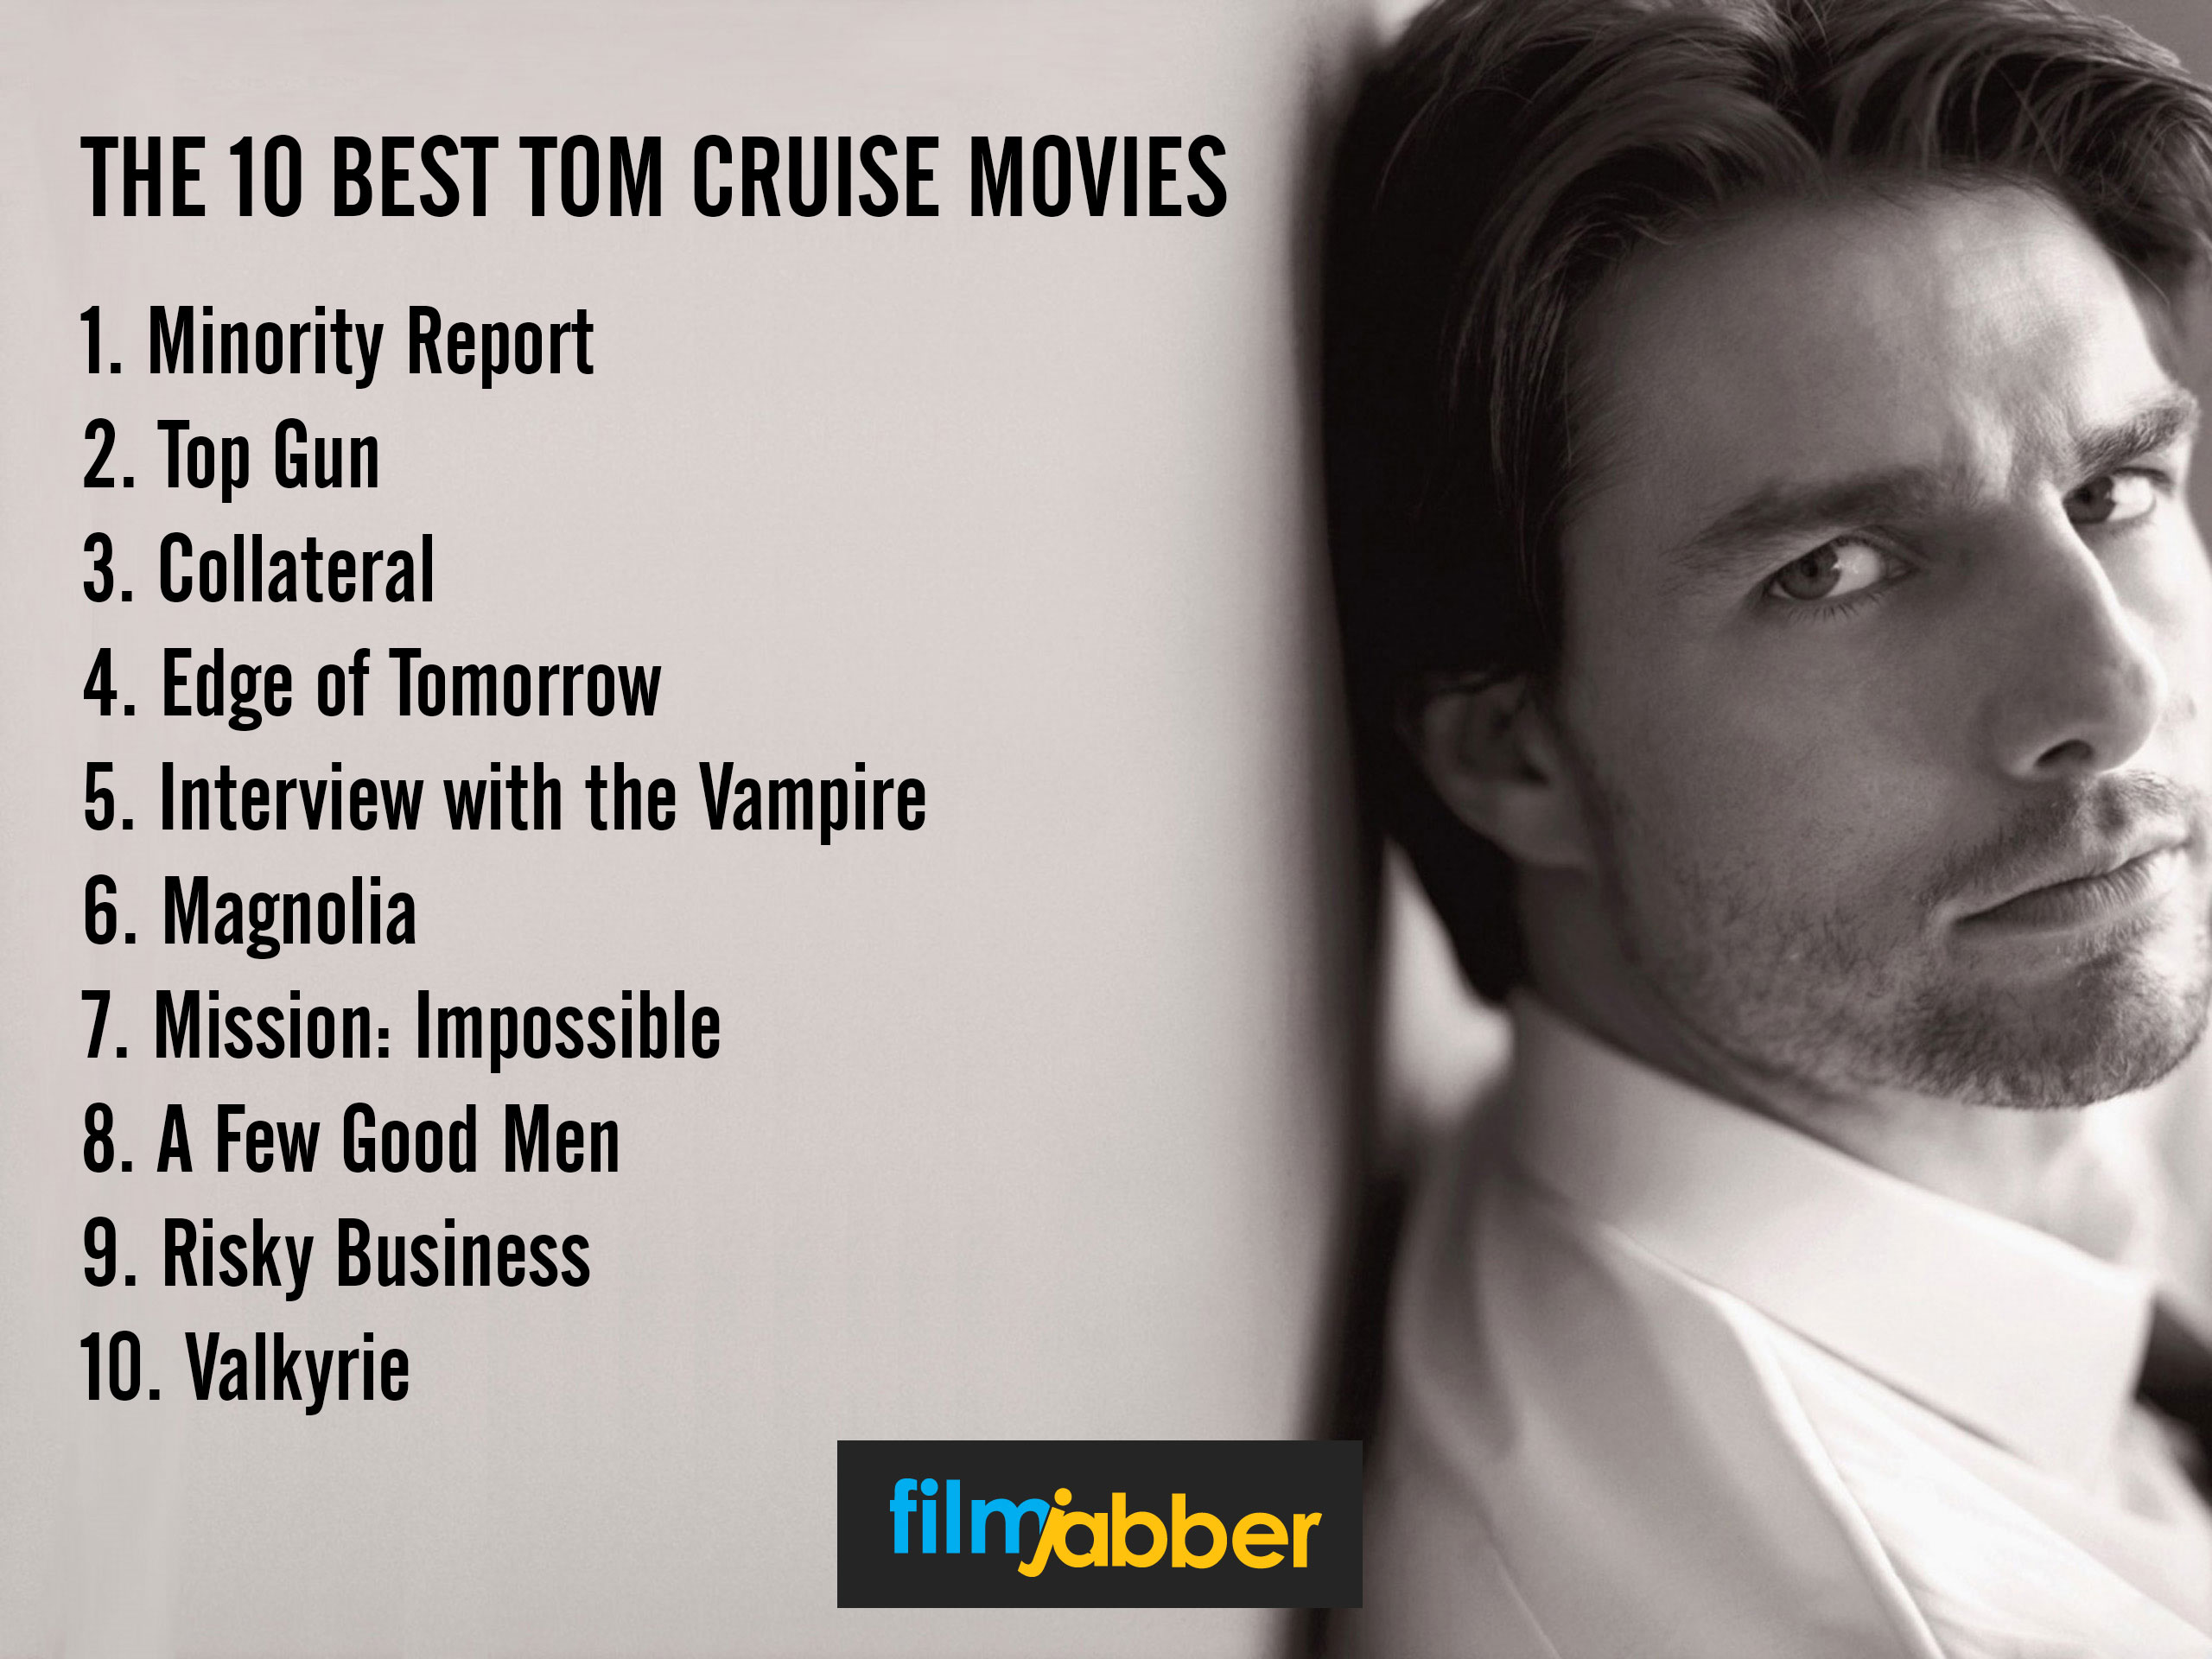 The 10 Best Tom Cruise Movies2560 x 1920